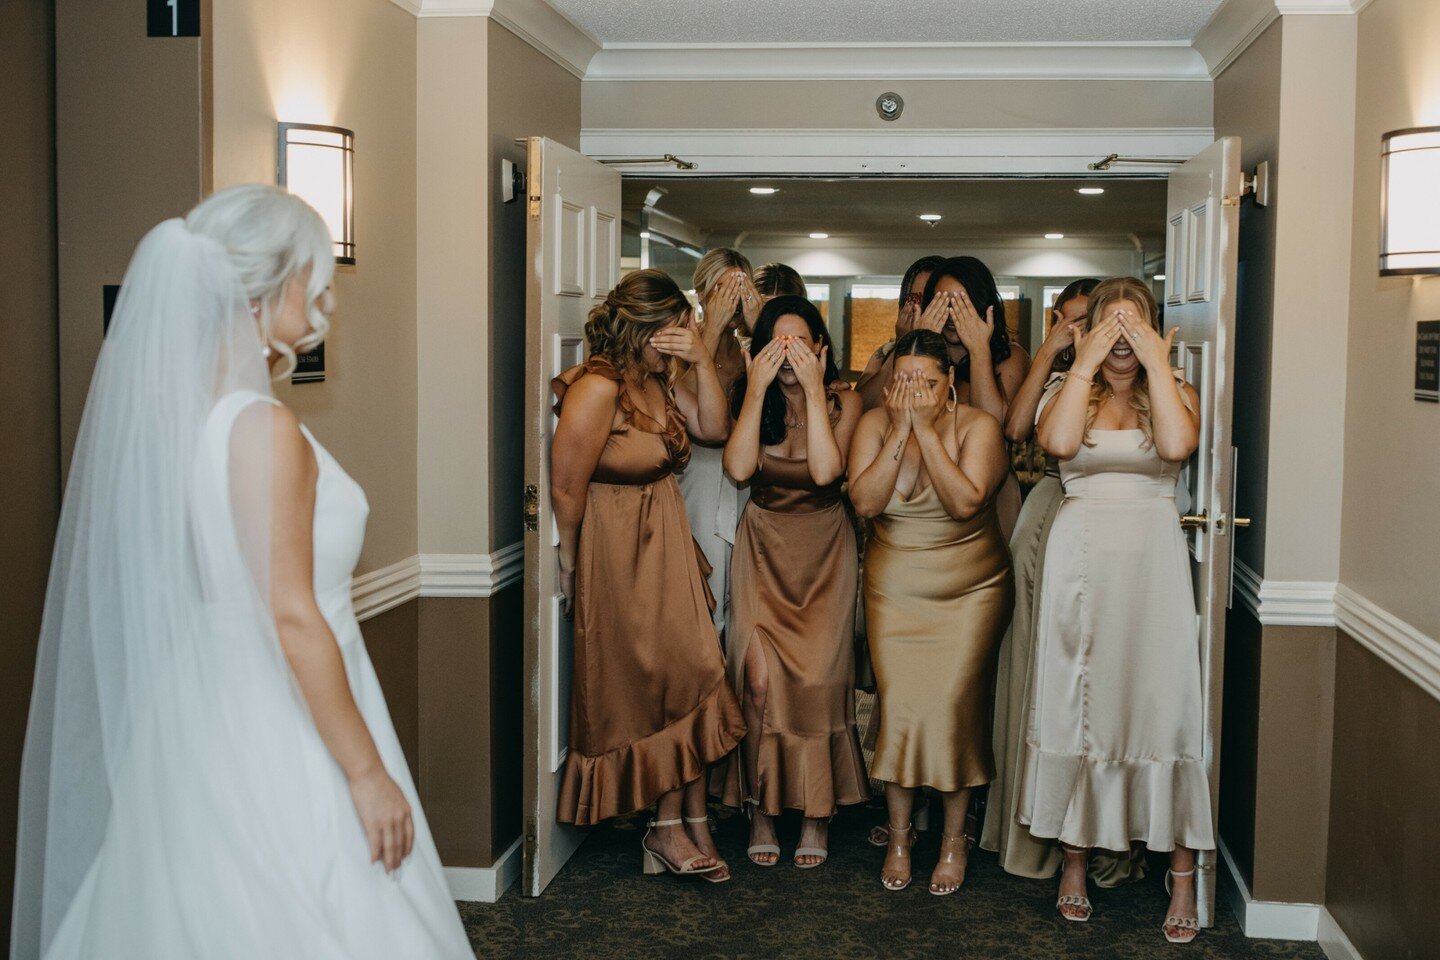 Do the first look with your bridesmaids! You won't regret it. AND when you do decide to do it, we will plan accordingly to make sure everyone in the bridal party will be photo ready so everyone feels confident and beautiful!

Makeup| #lhnartistHollie